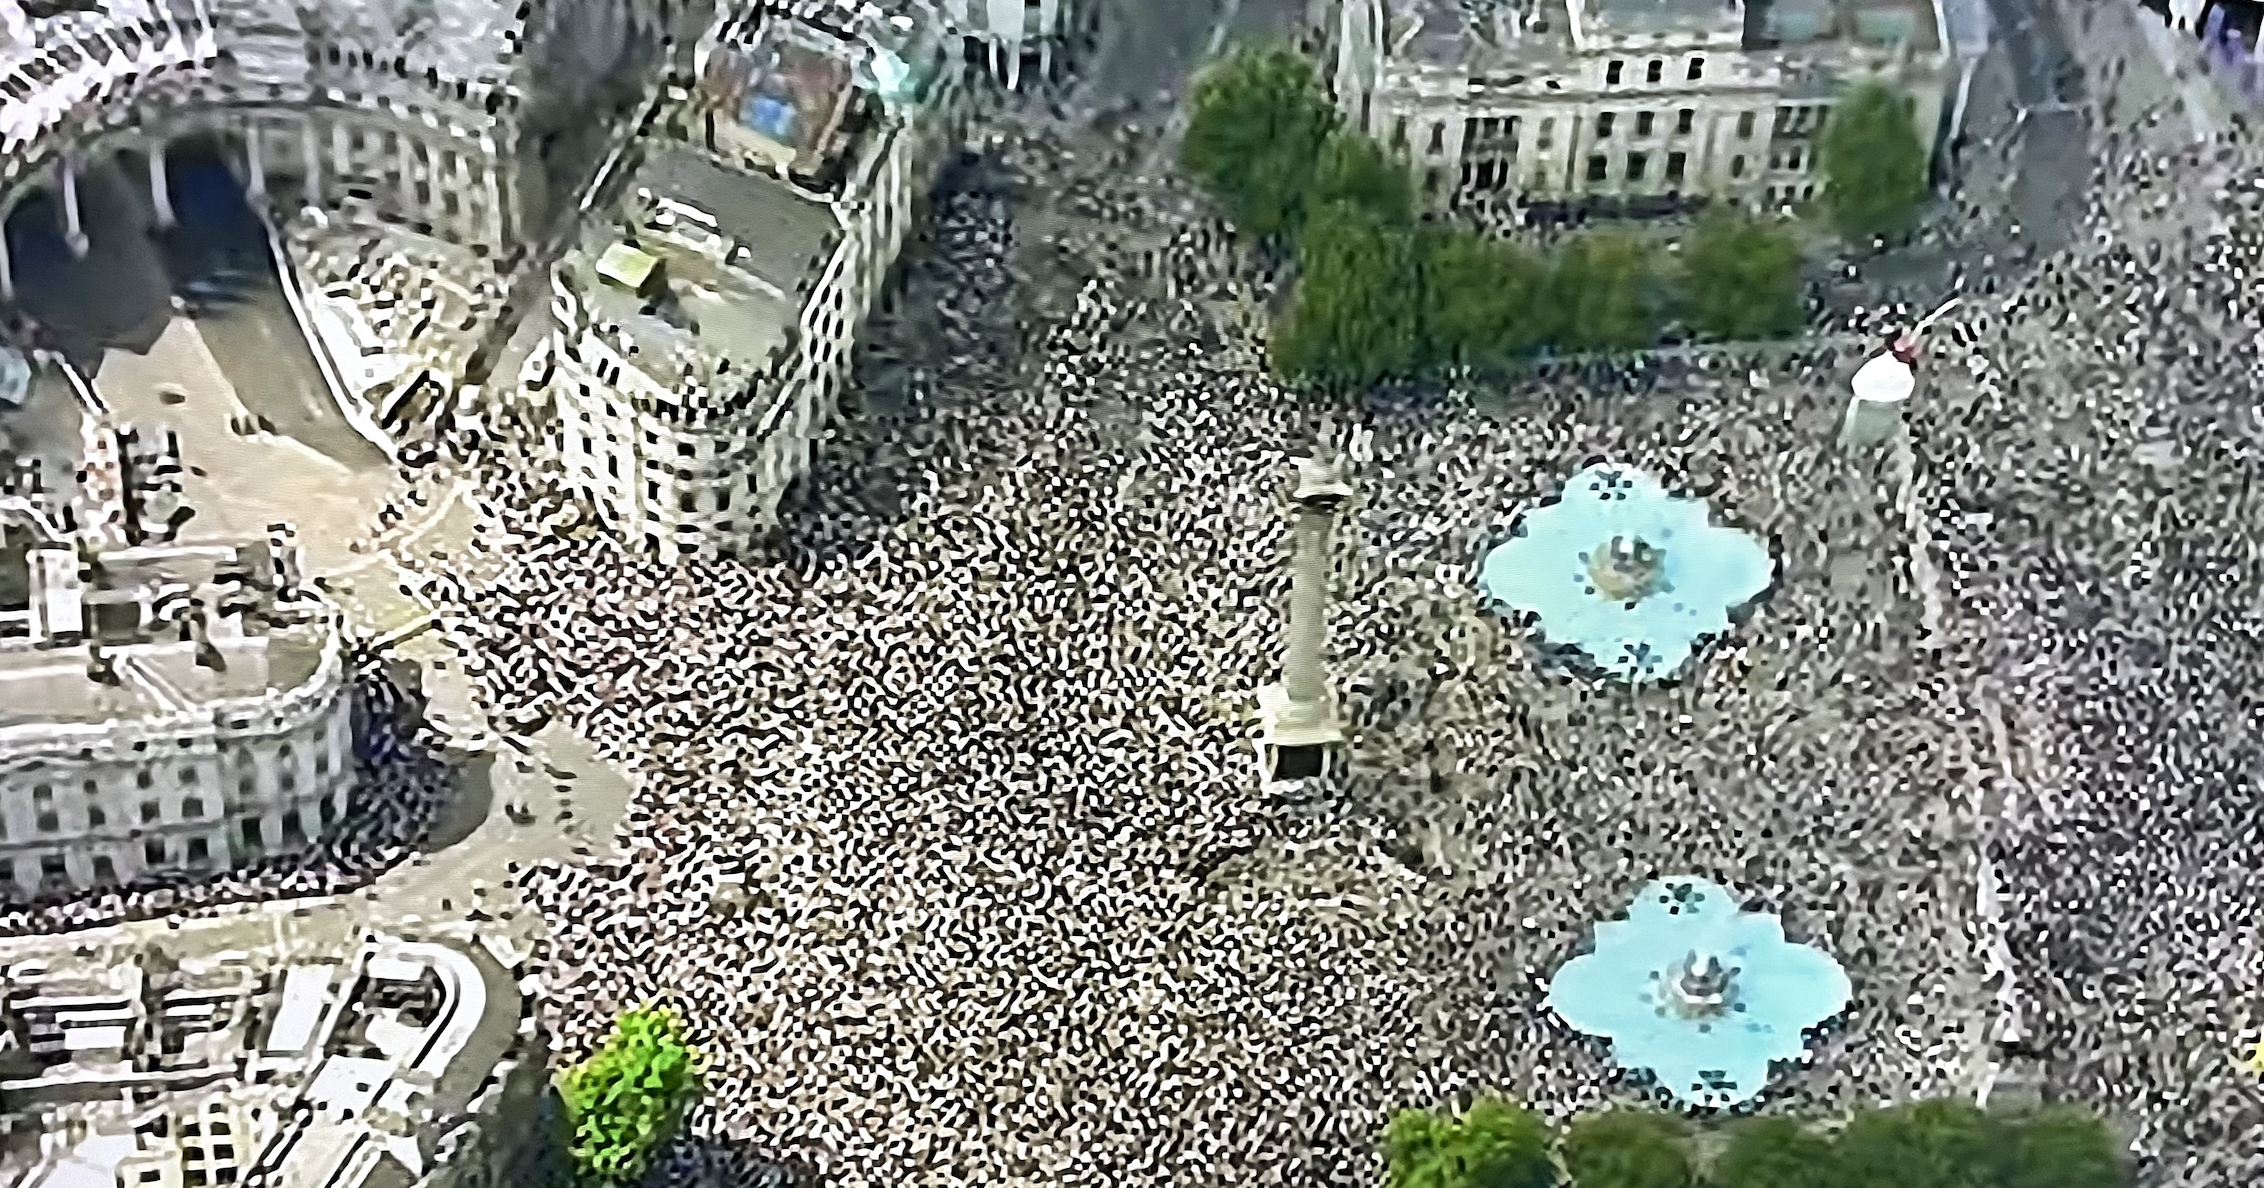 Crowds at Trafagal Square for the Queen's Platinum Jubilee.